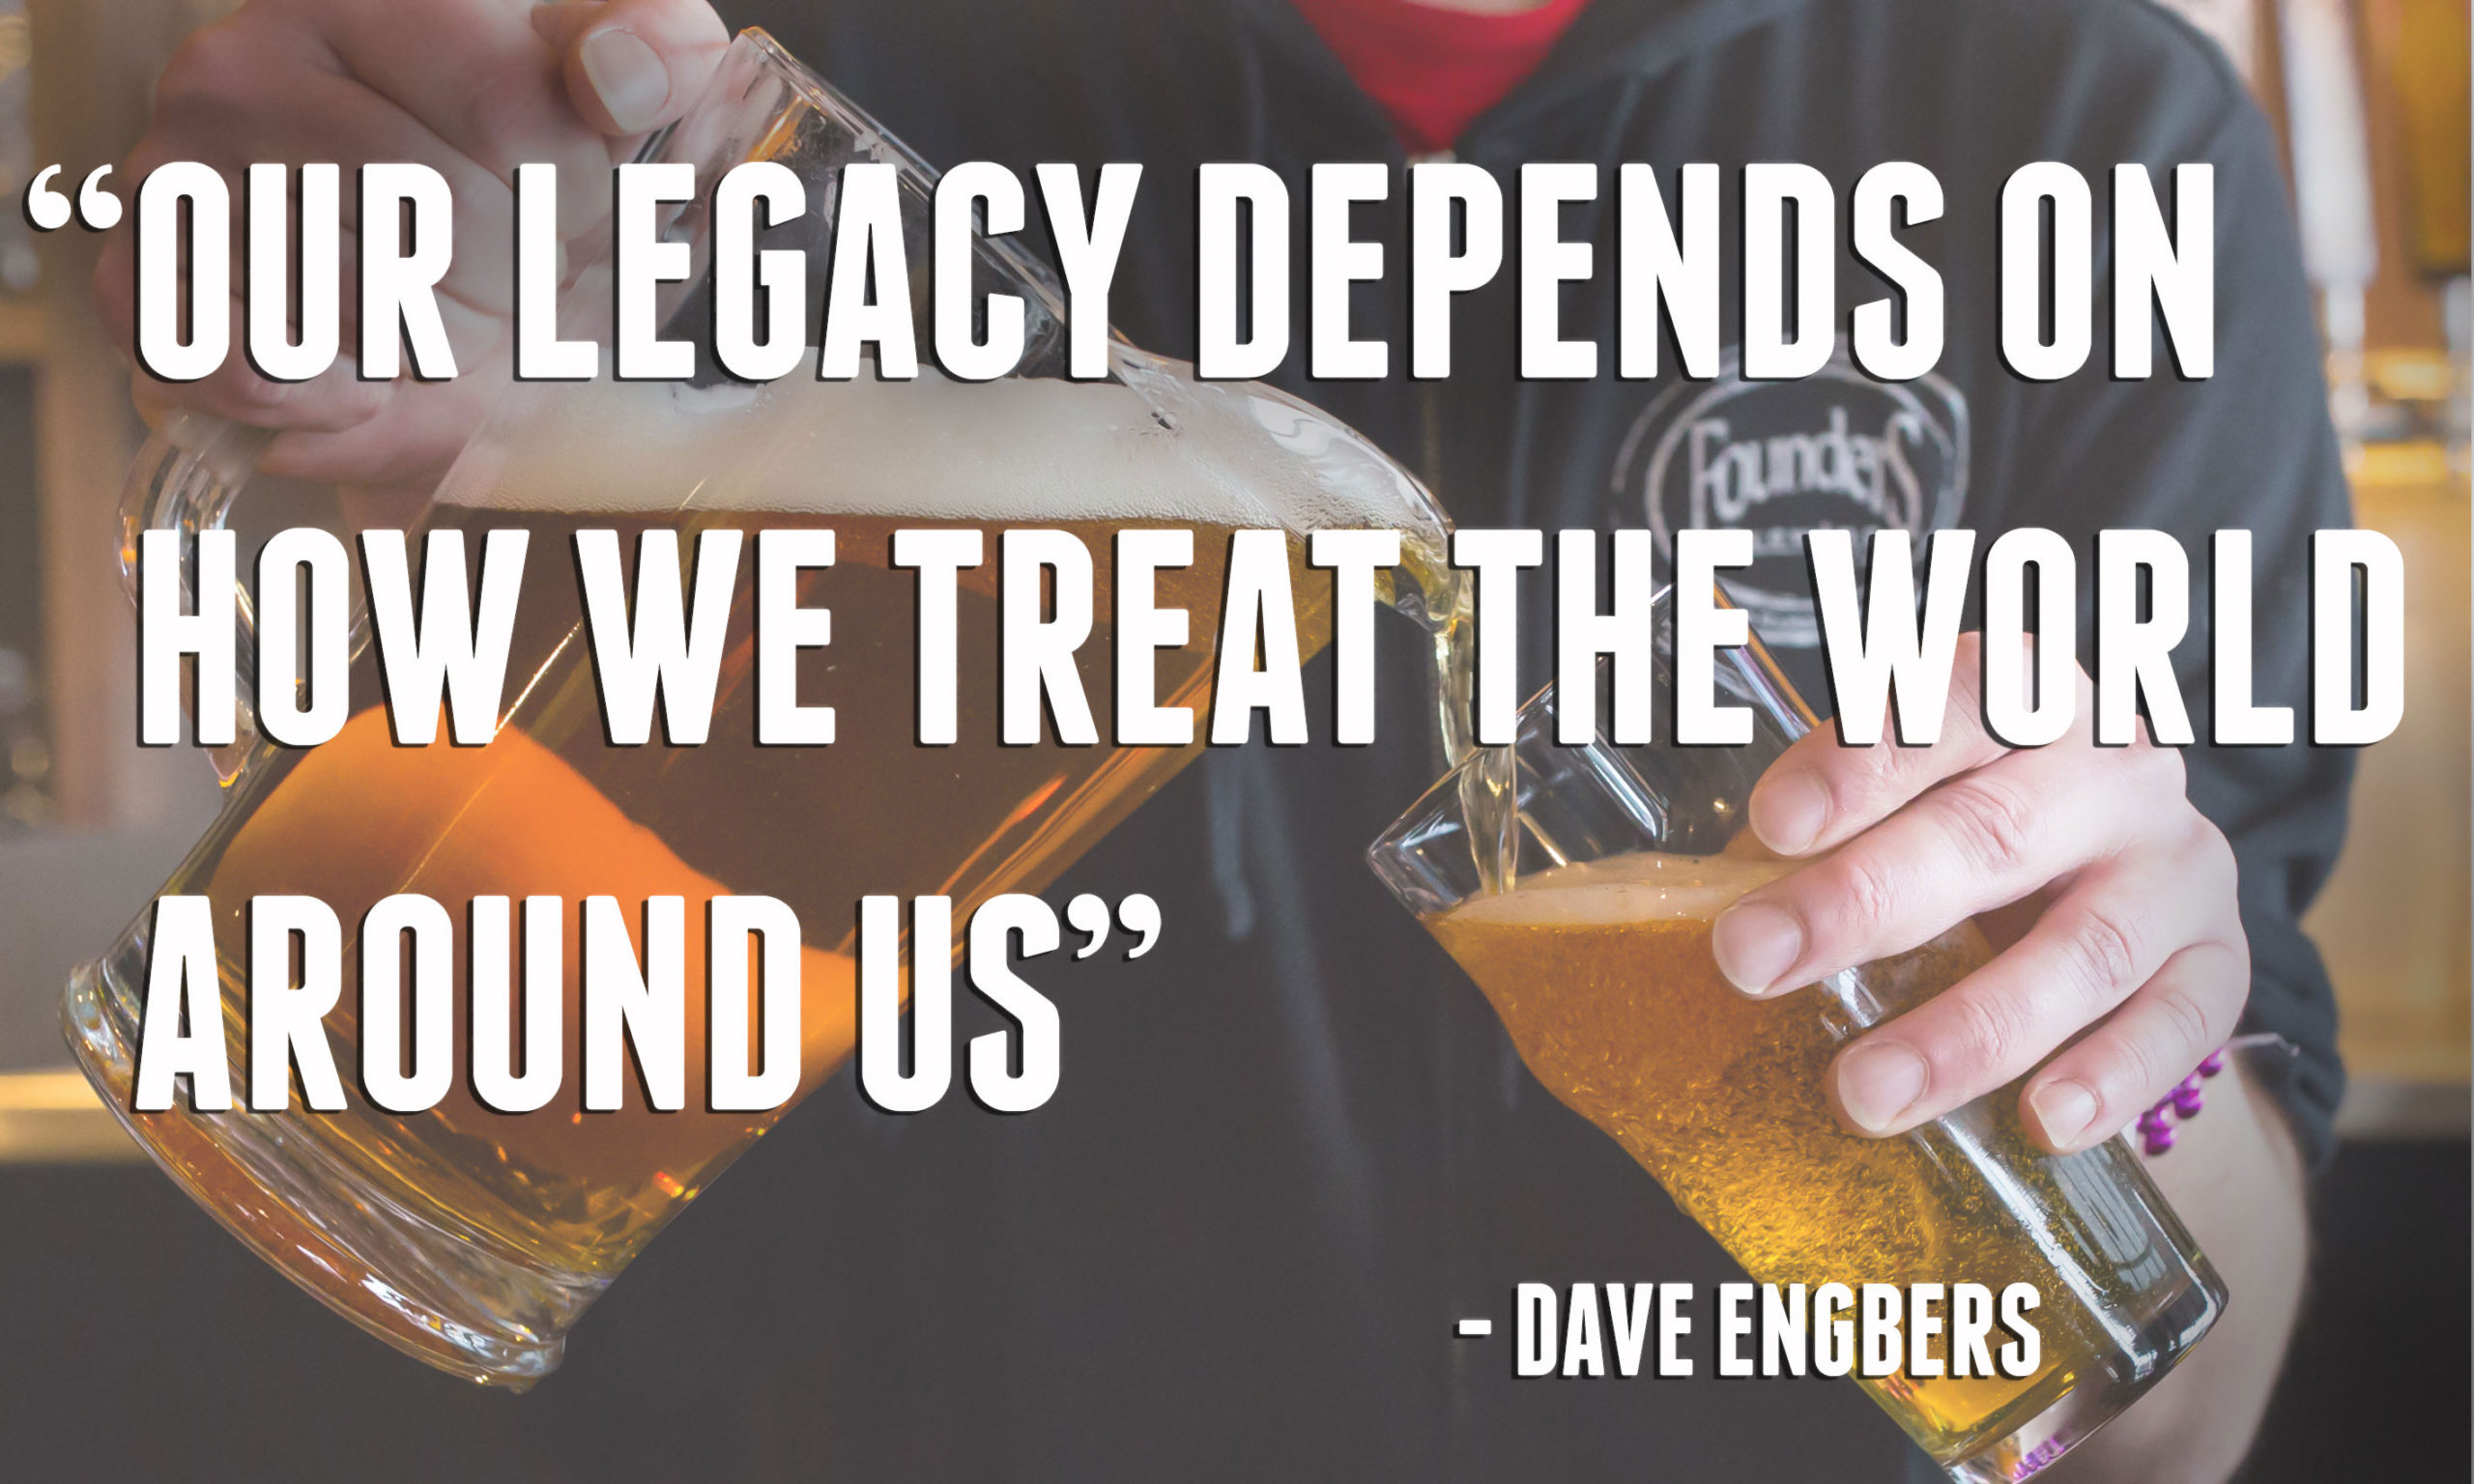 Big Pitcher Quote From Dave Engbers